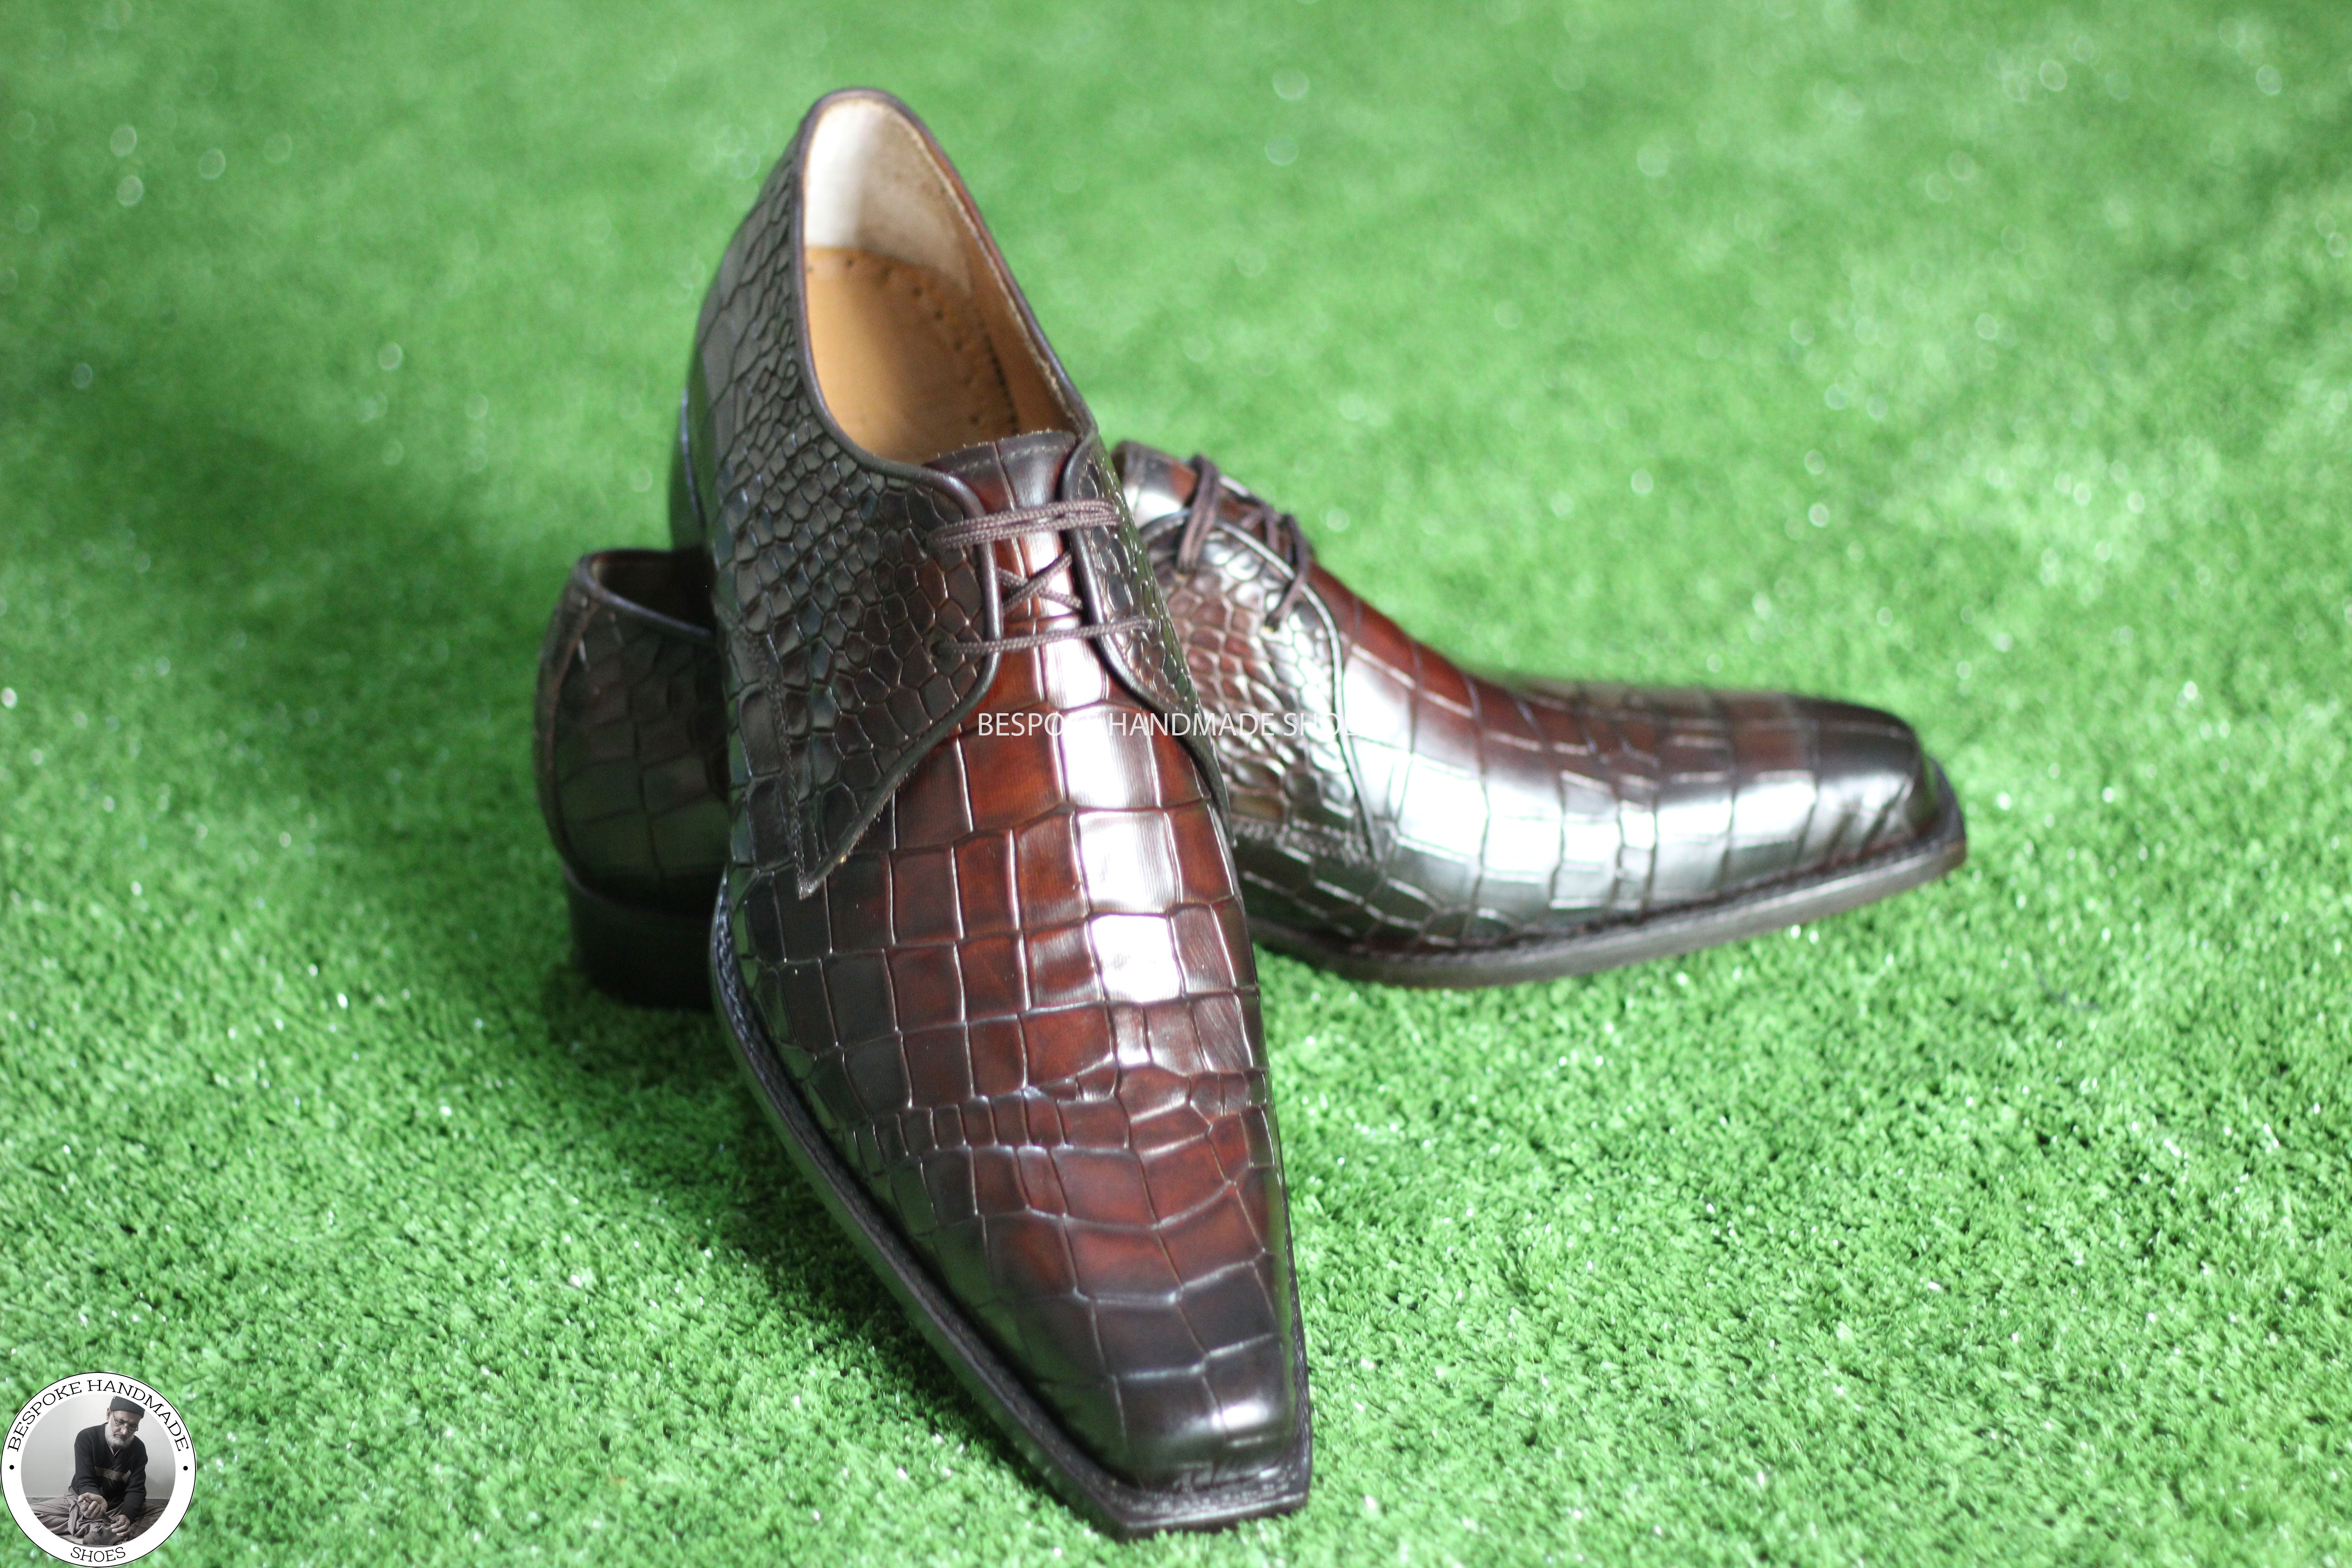 Handmade Premium Quality Burgundy Black Shaded Leather, Oxford Lace Up Wholecut Derby Gentlemen Shoes